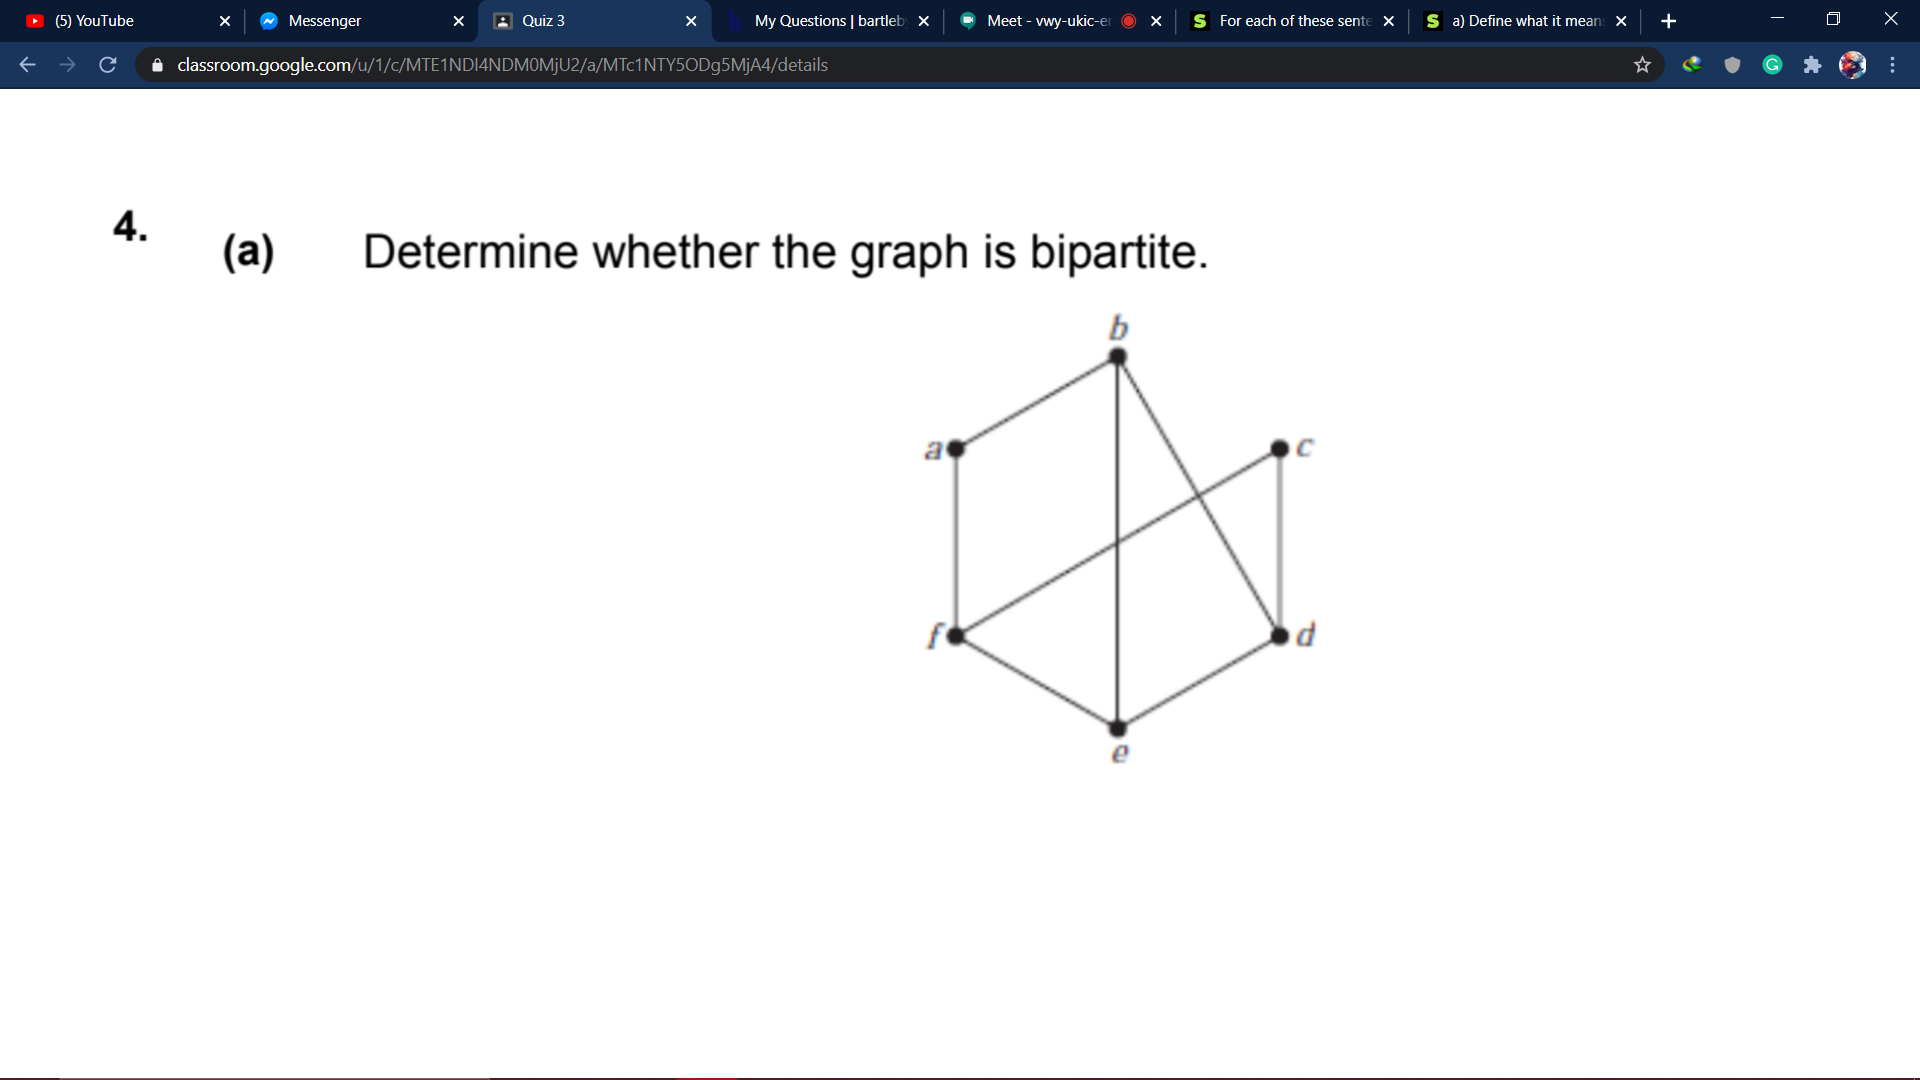 Determine whether the graph is bipartite.
b
a
